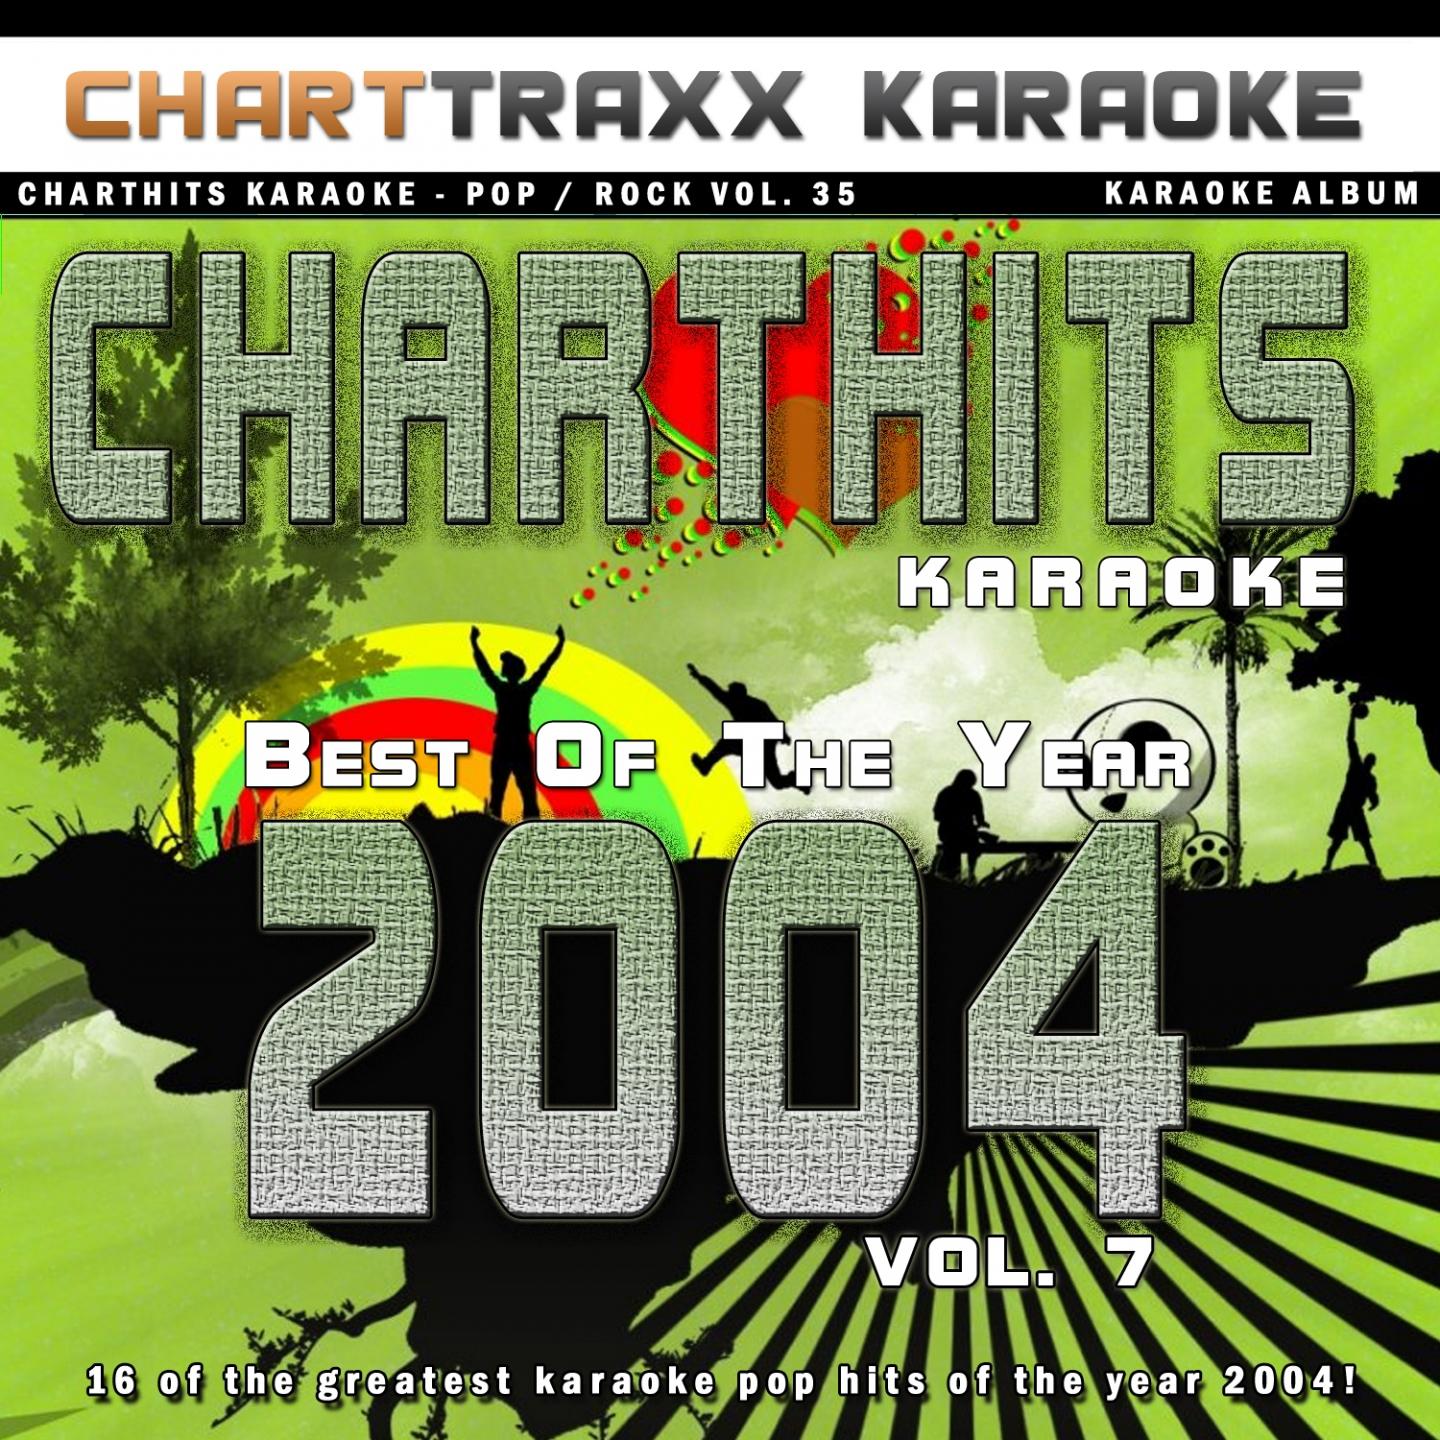 Charthits Karaoke: the Very Best of the Year 2004, Vol. 7